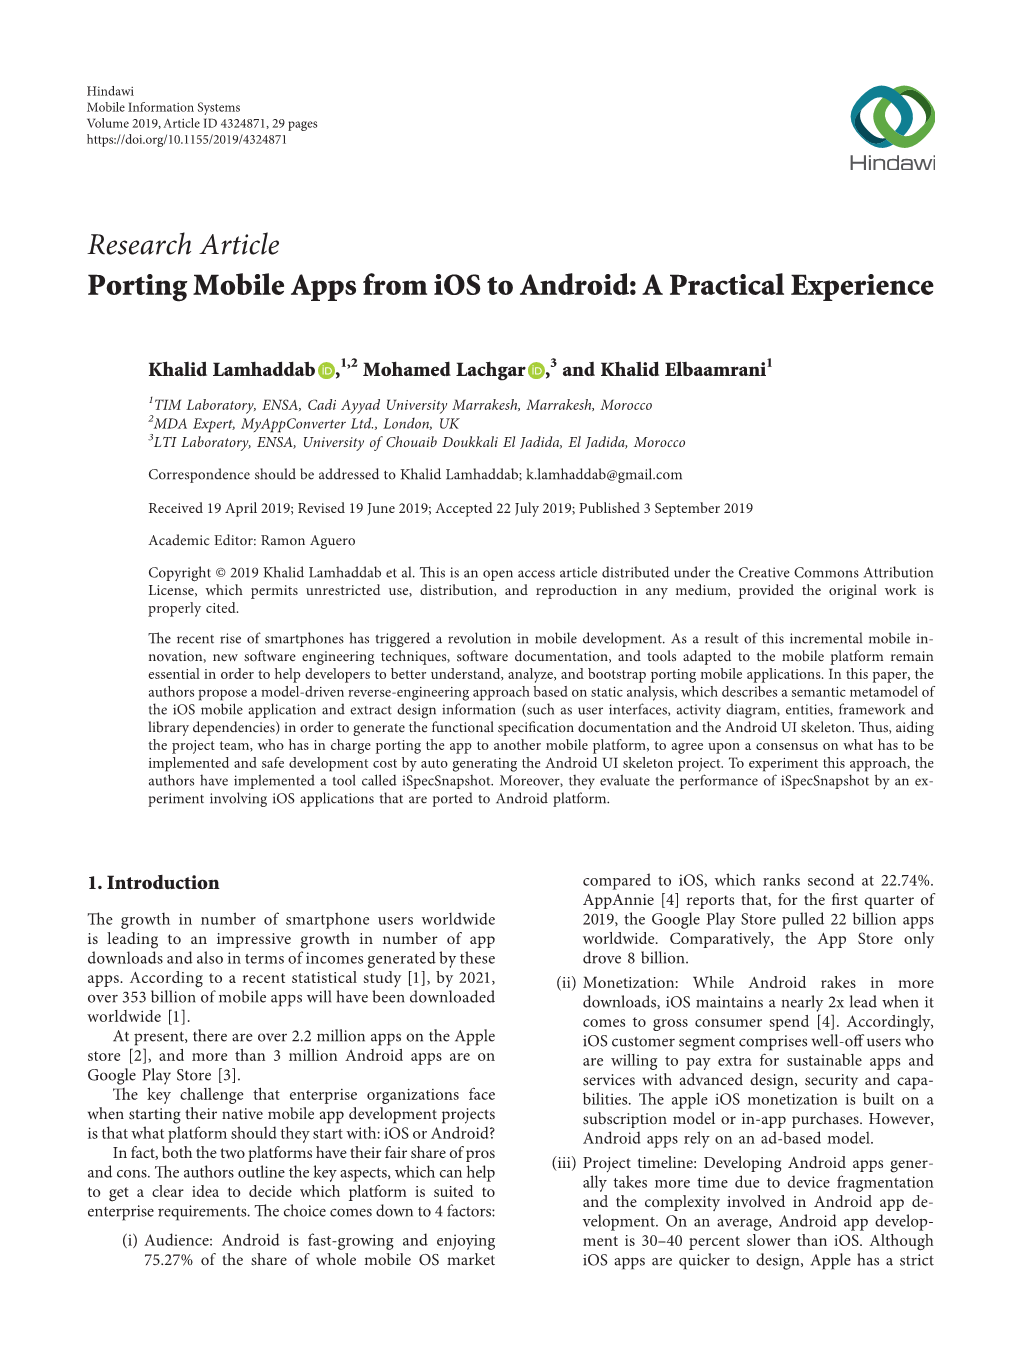 Research Article Porting Mobile Apps from Ios to Android: a Practical Experience